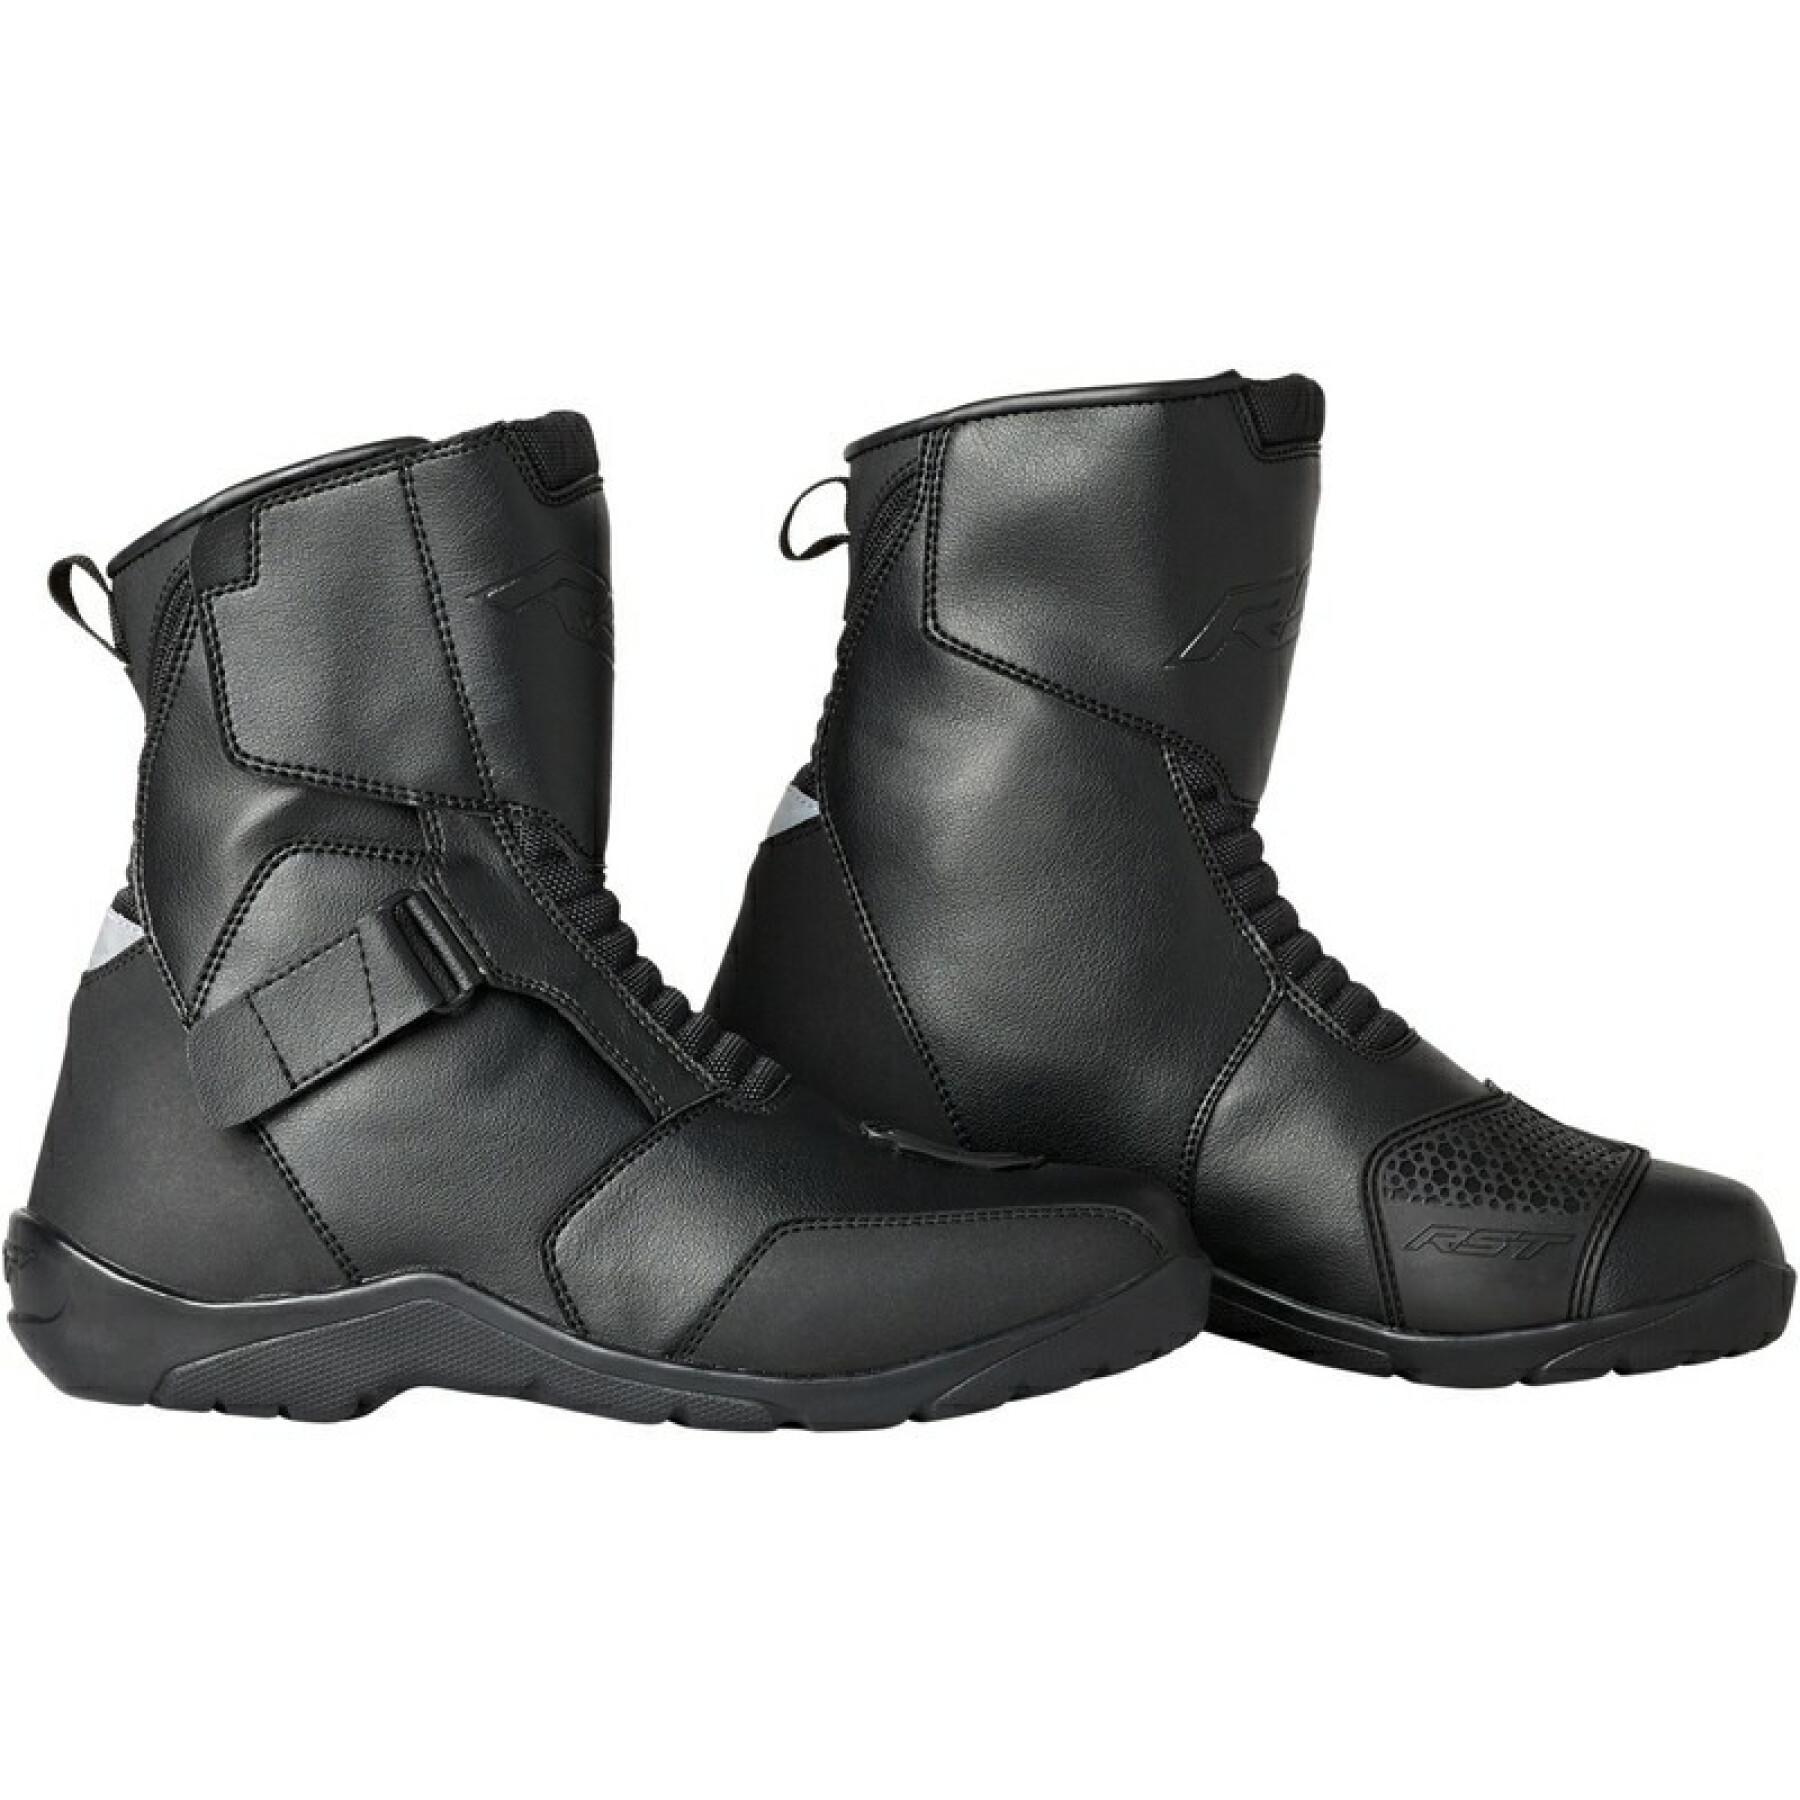 Motorcycle boots RST Axiom mid waterproof CE